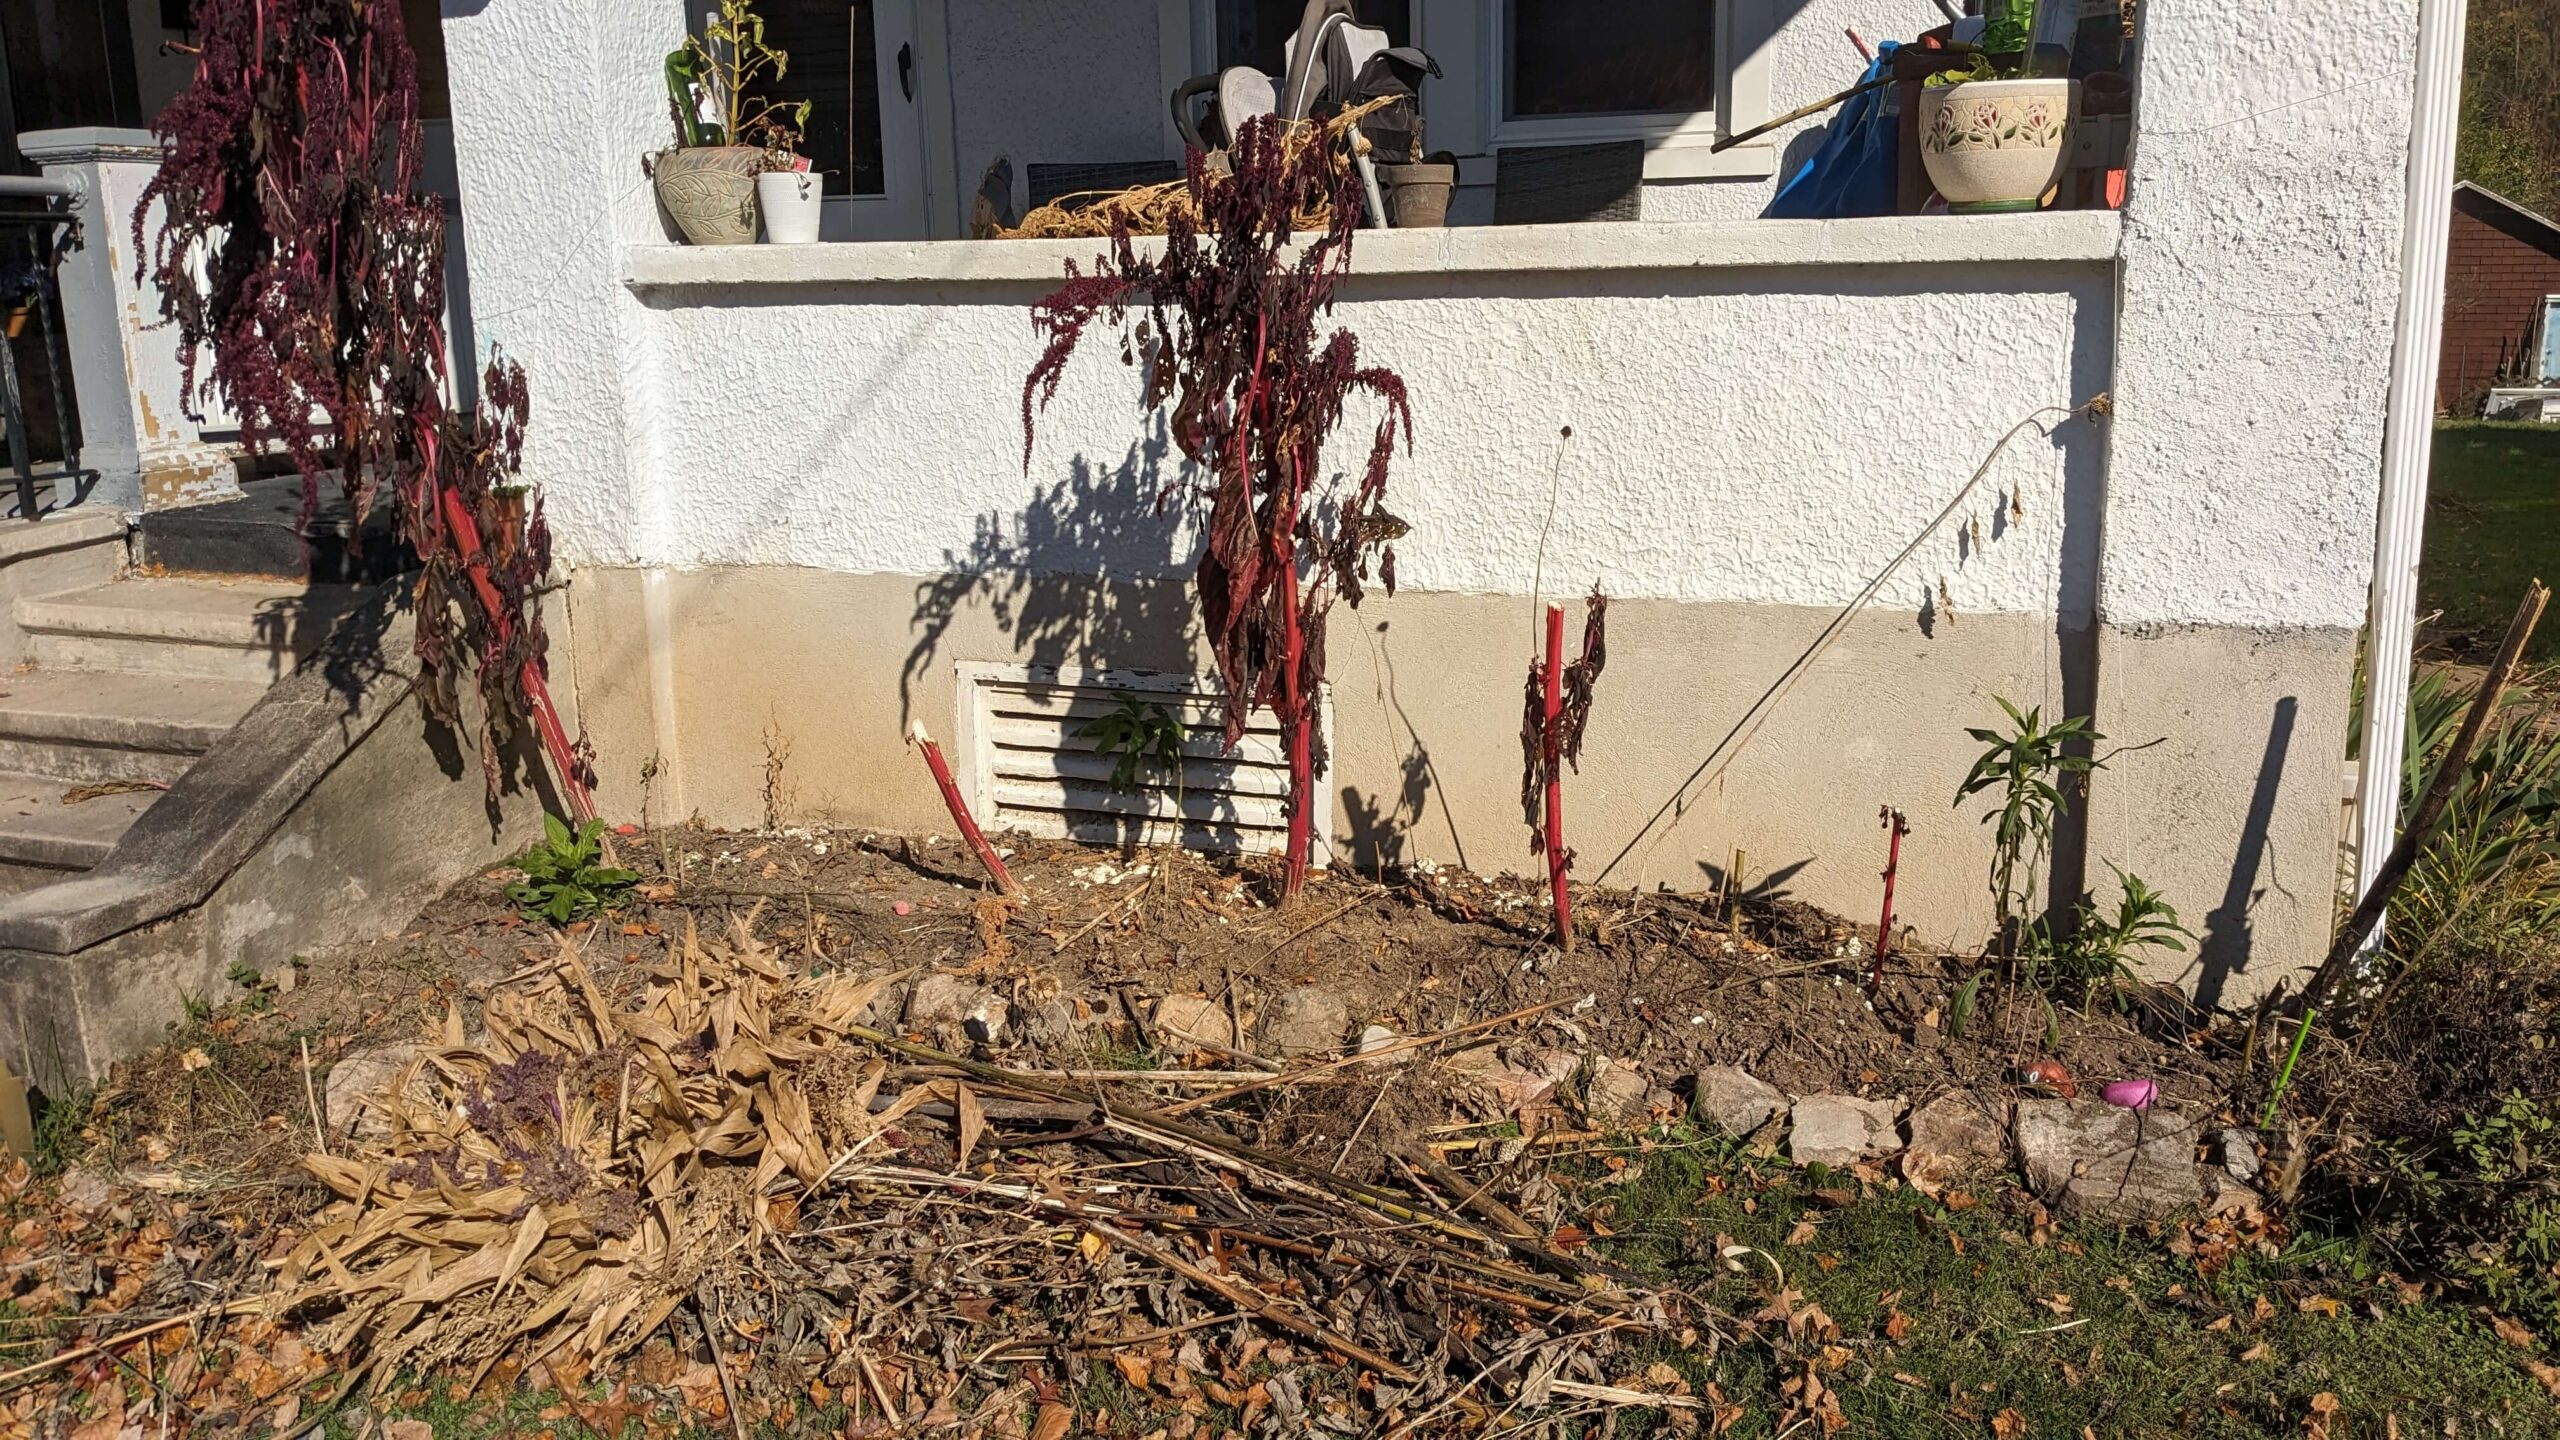 an almost empty flower bed with the stalks of giant purple amaranth plants